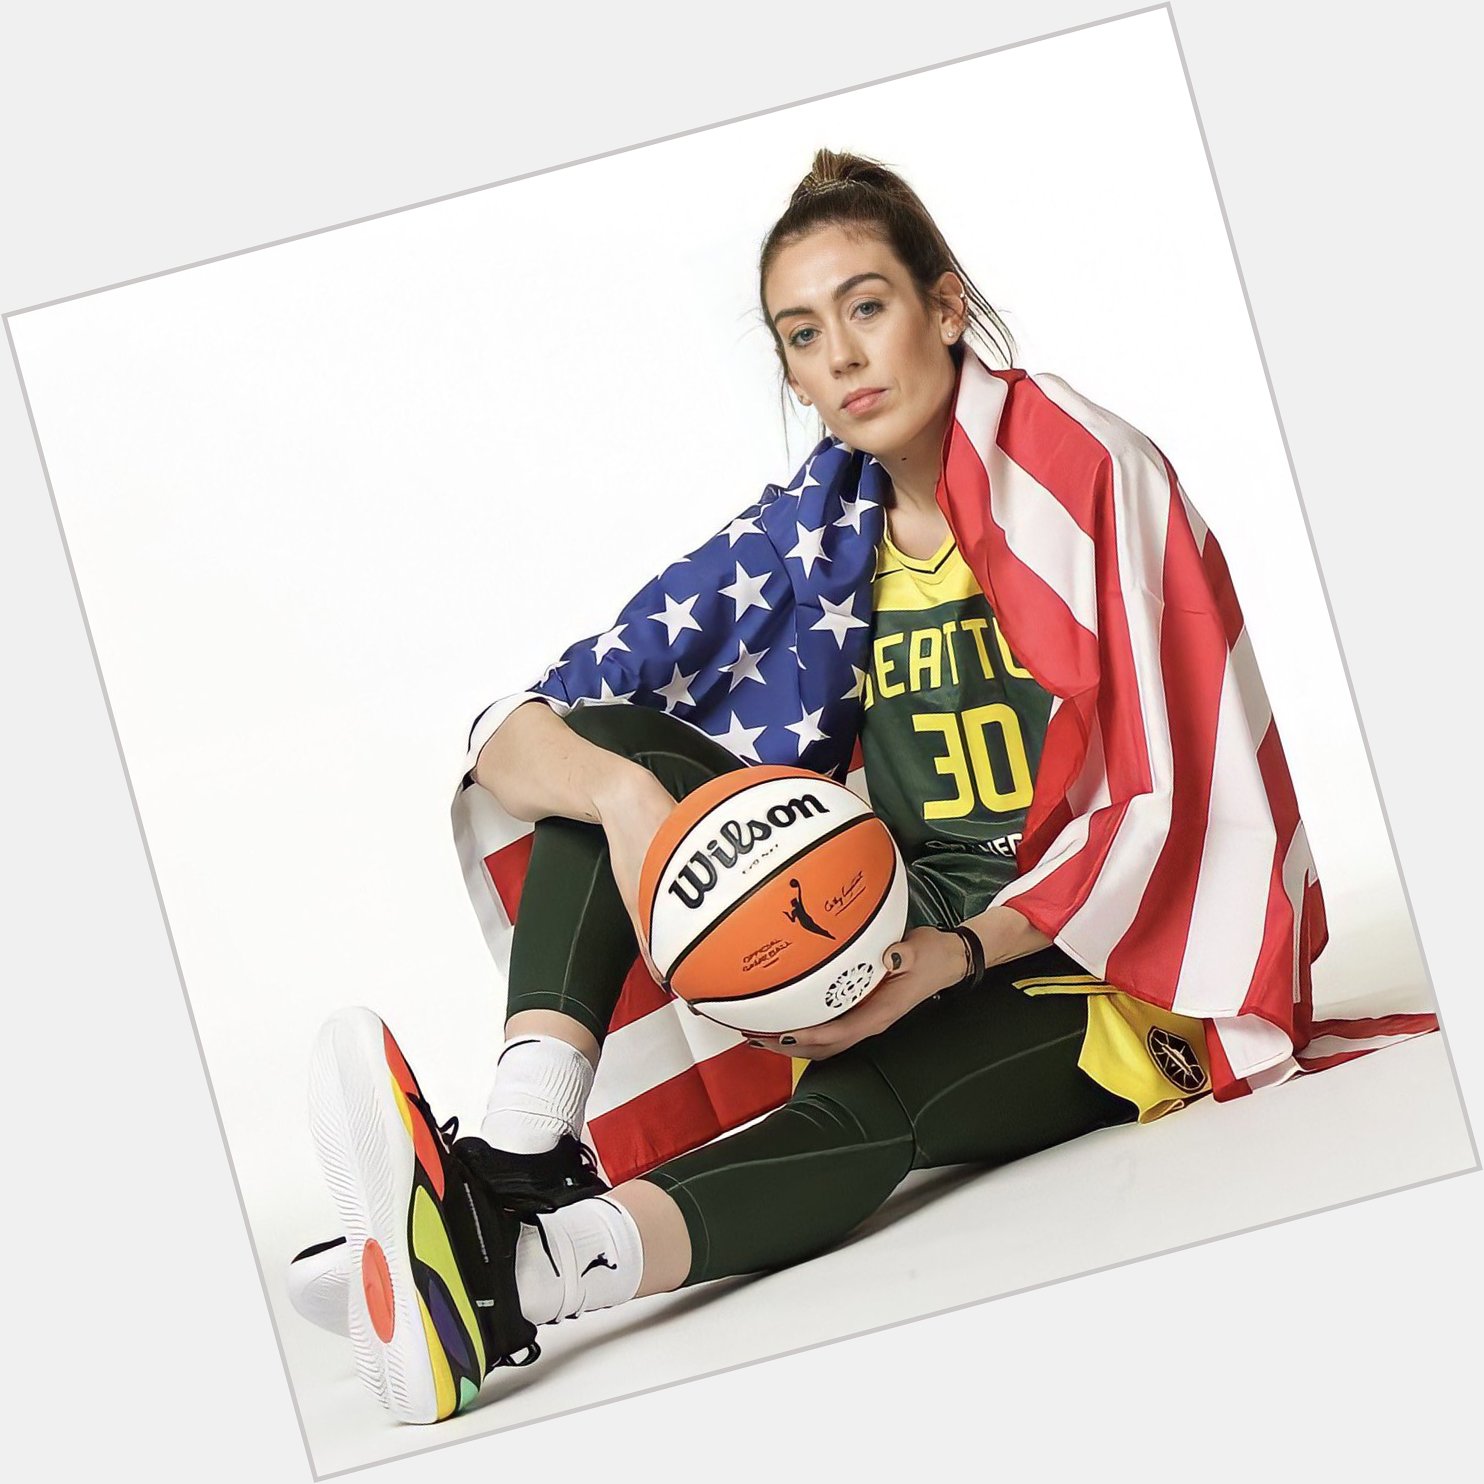 Happy birthday to one of the best BASKETBALL PLAYERS ON THE PLANET RIGHT NOW Breanna Stewart 